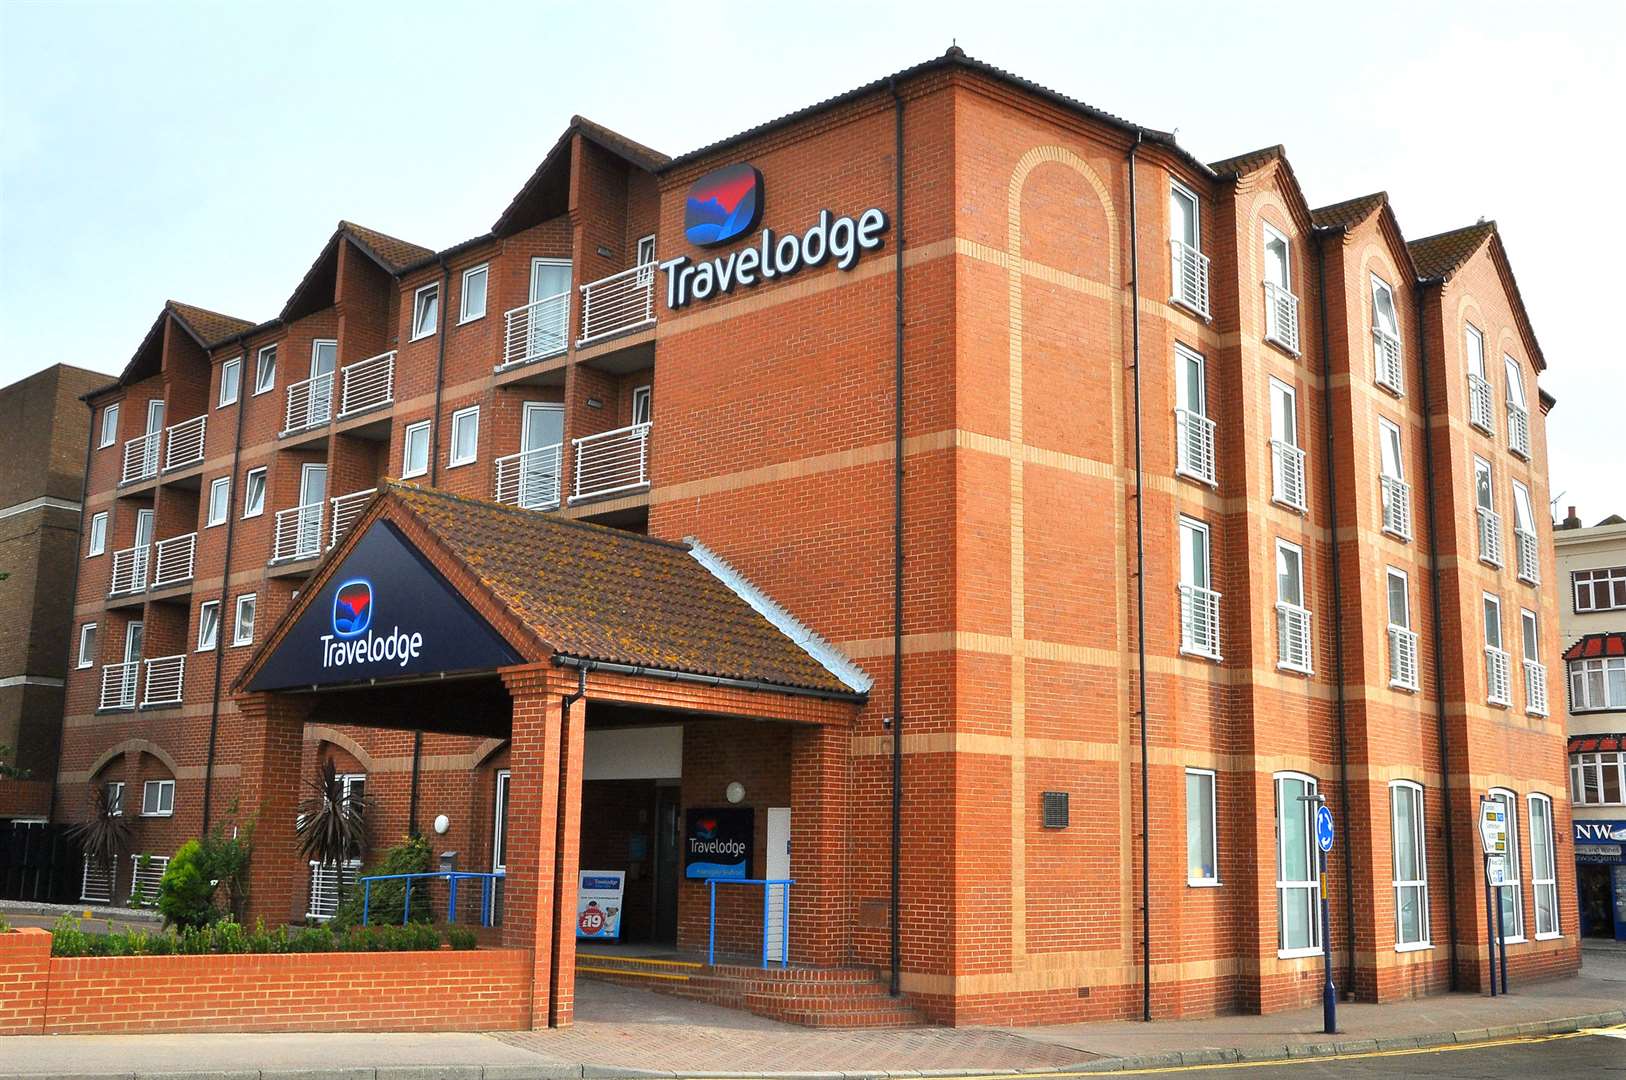 The alleged attack happened at a Travelodge in Ramsgate